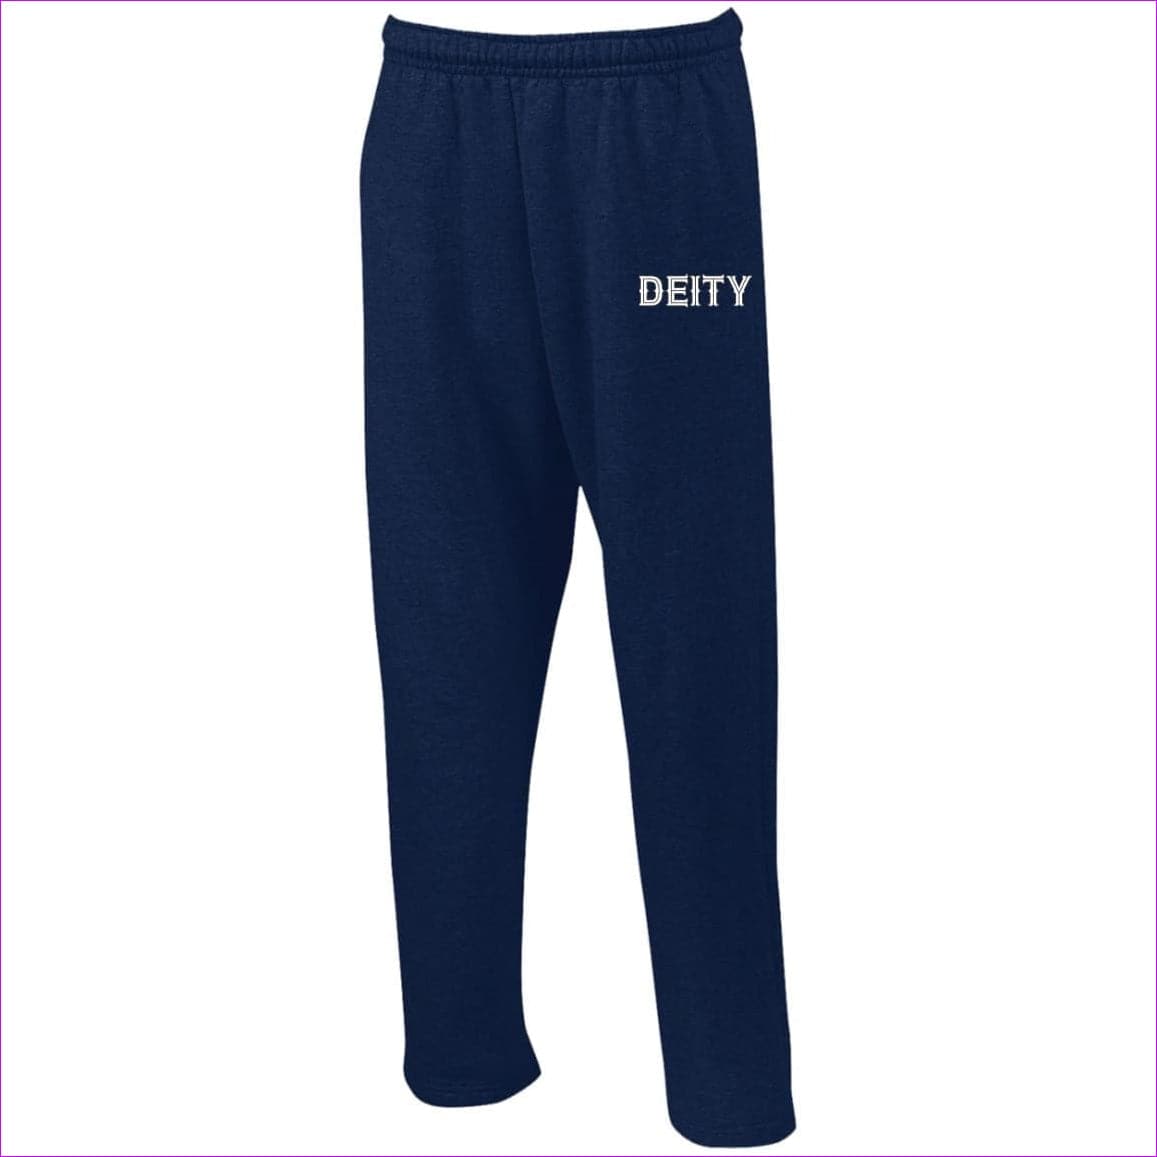 Navy Deity Open Bottom Sweatpants with Pockets - unisex sweatpants at TFC&H Co.